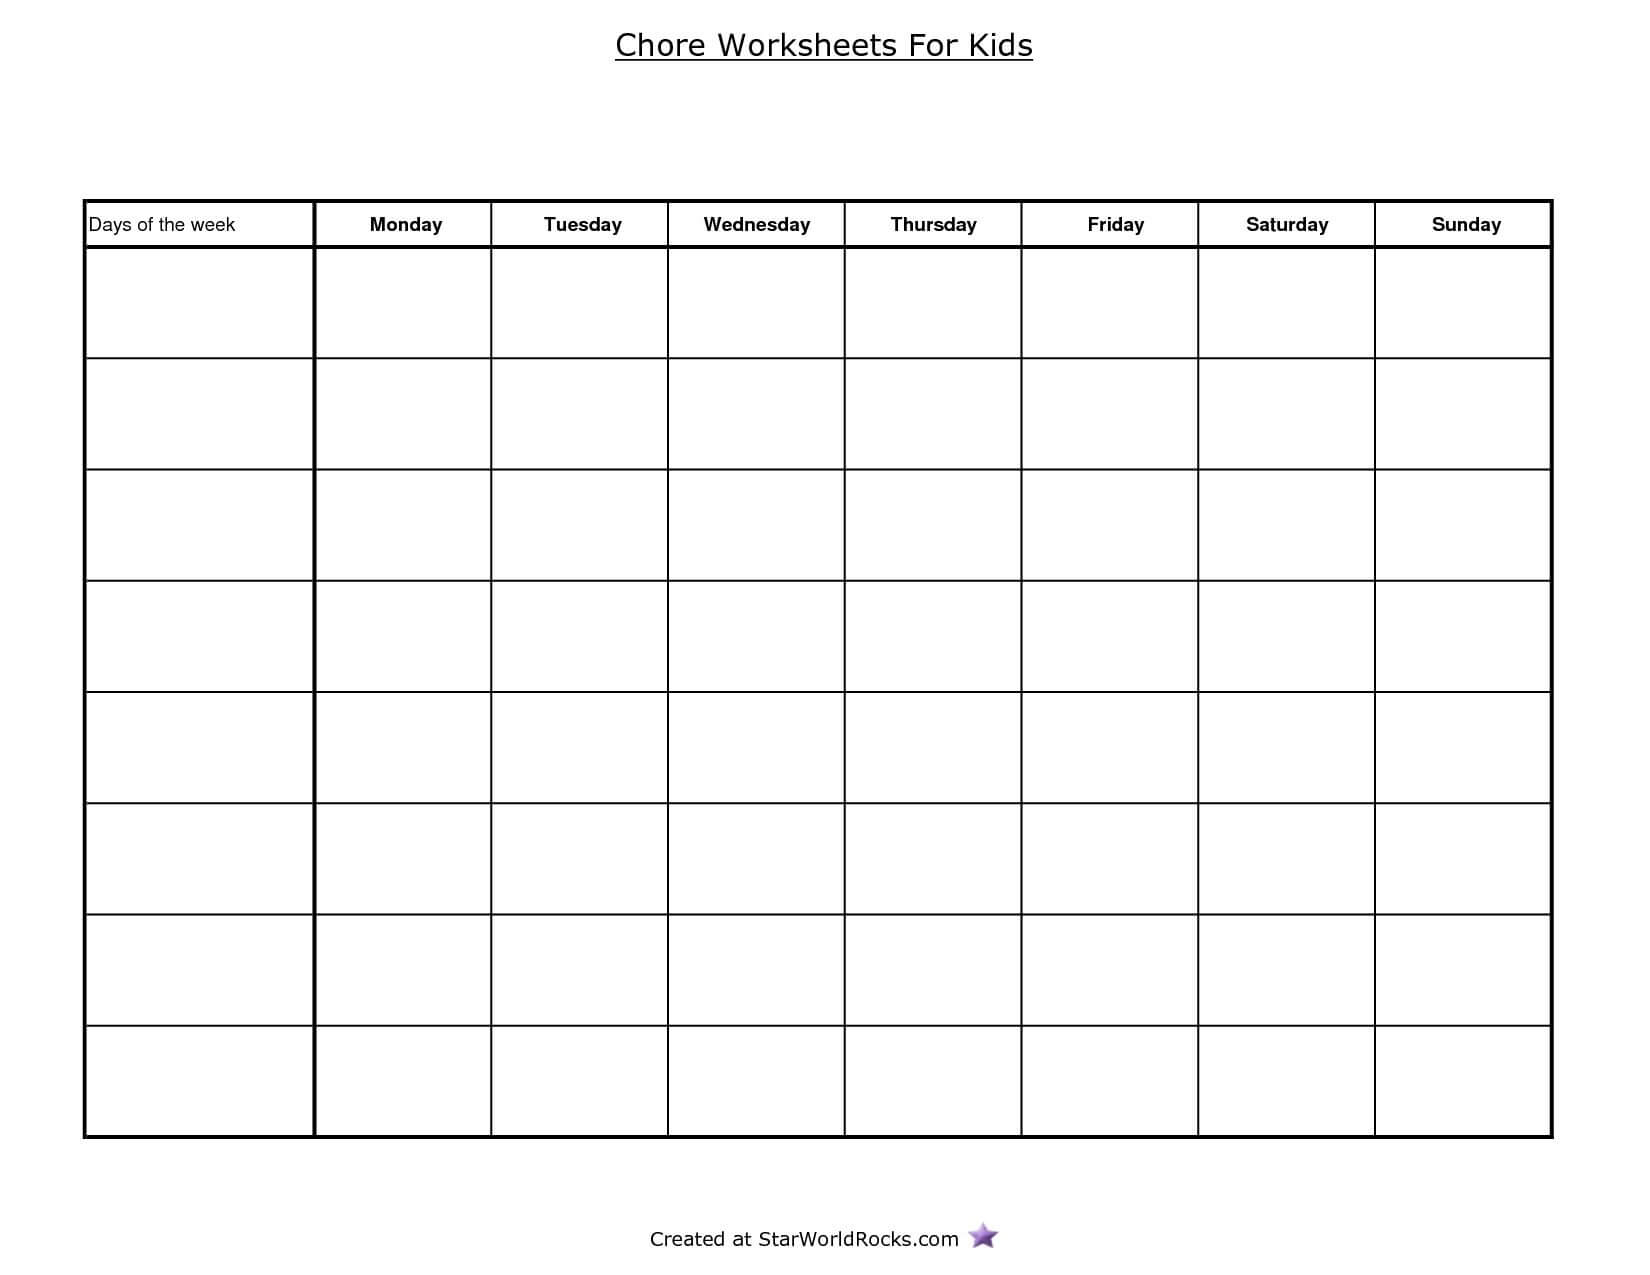 Image Result For Blank Table | Free Printable Chore Charts In Blank Reward Chart Template